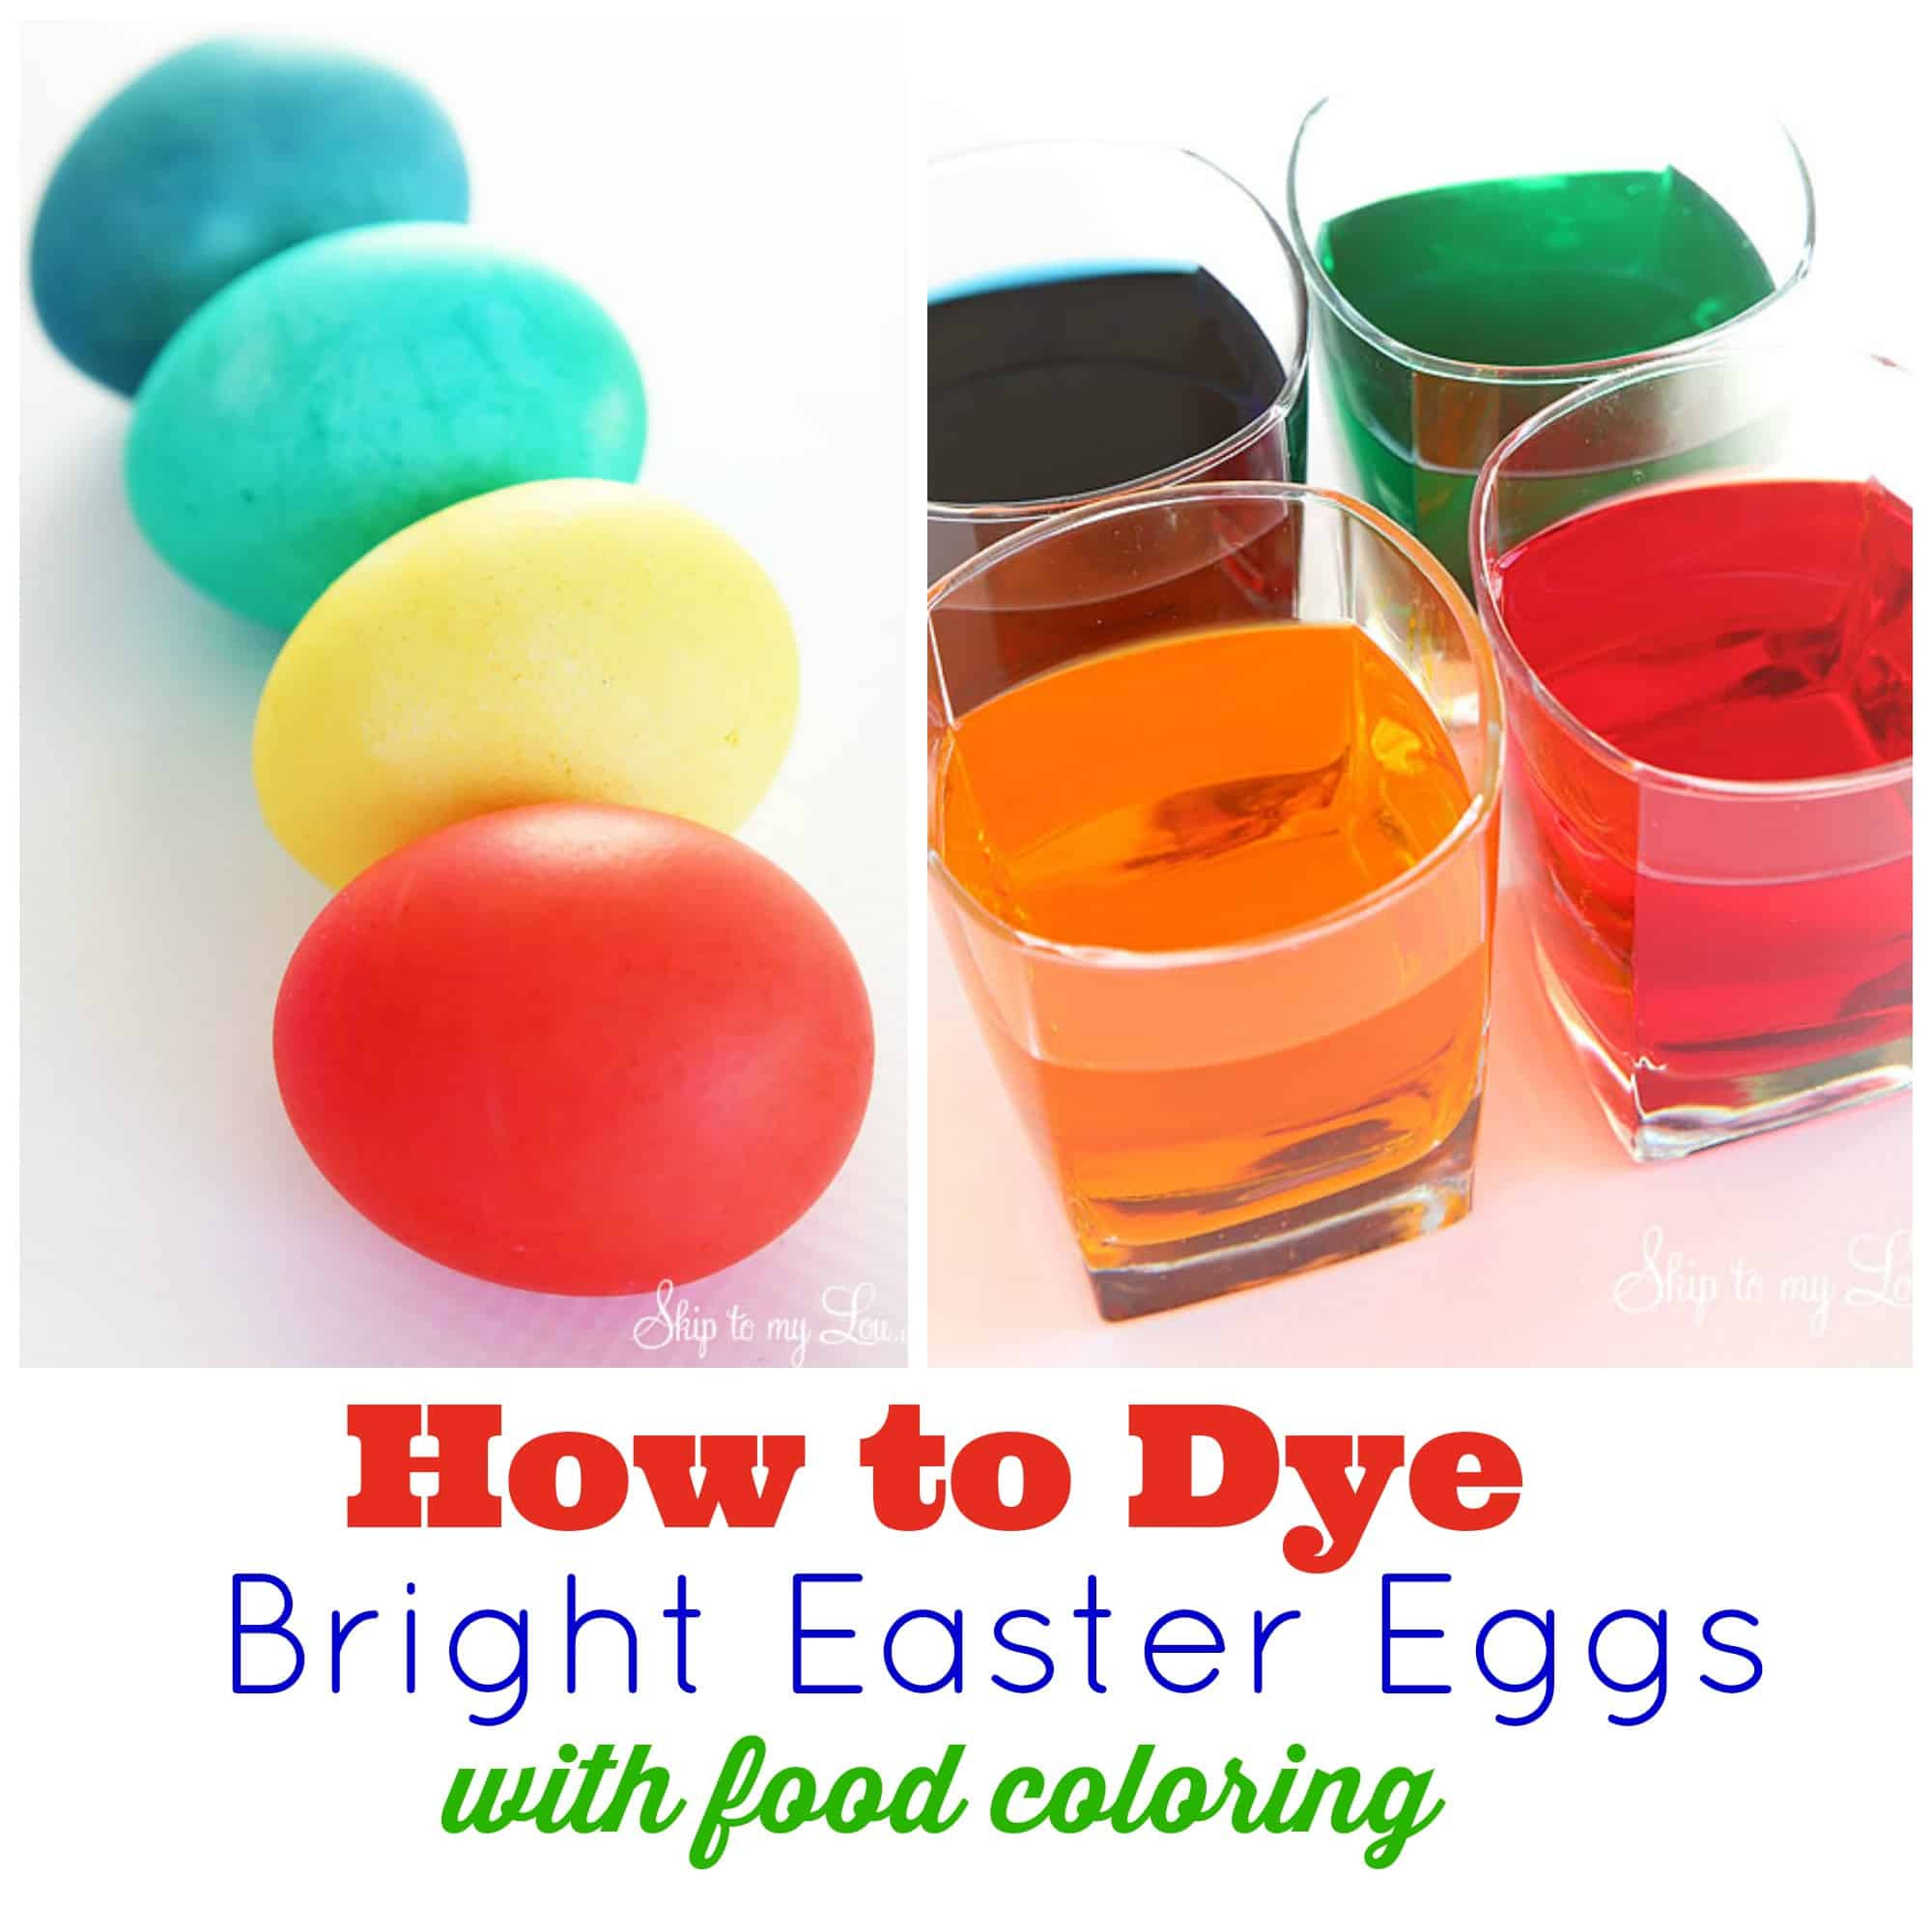 Easter Egg Dye Food Coloring Chart
 How to dye eggs with food coloring